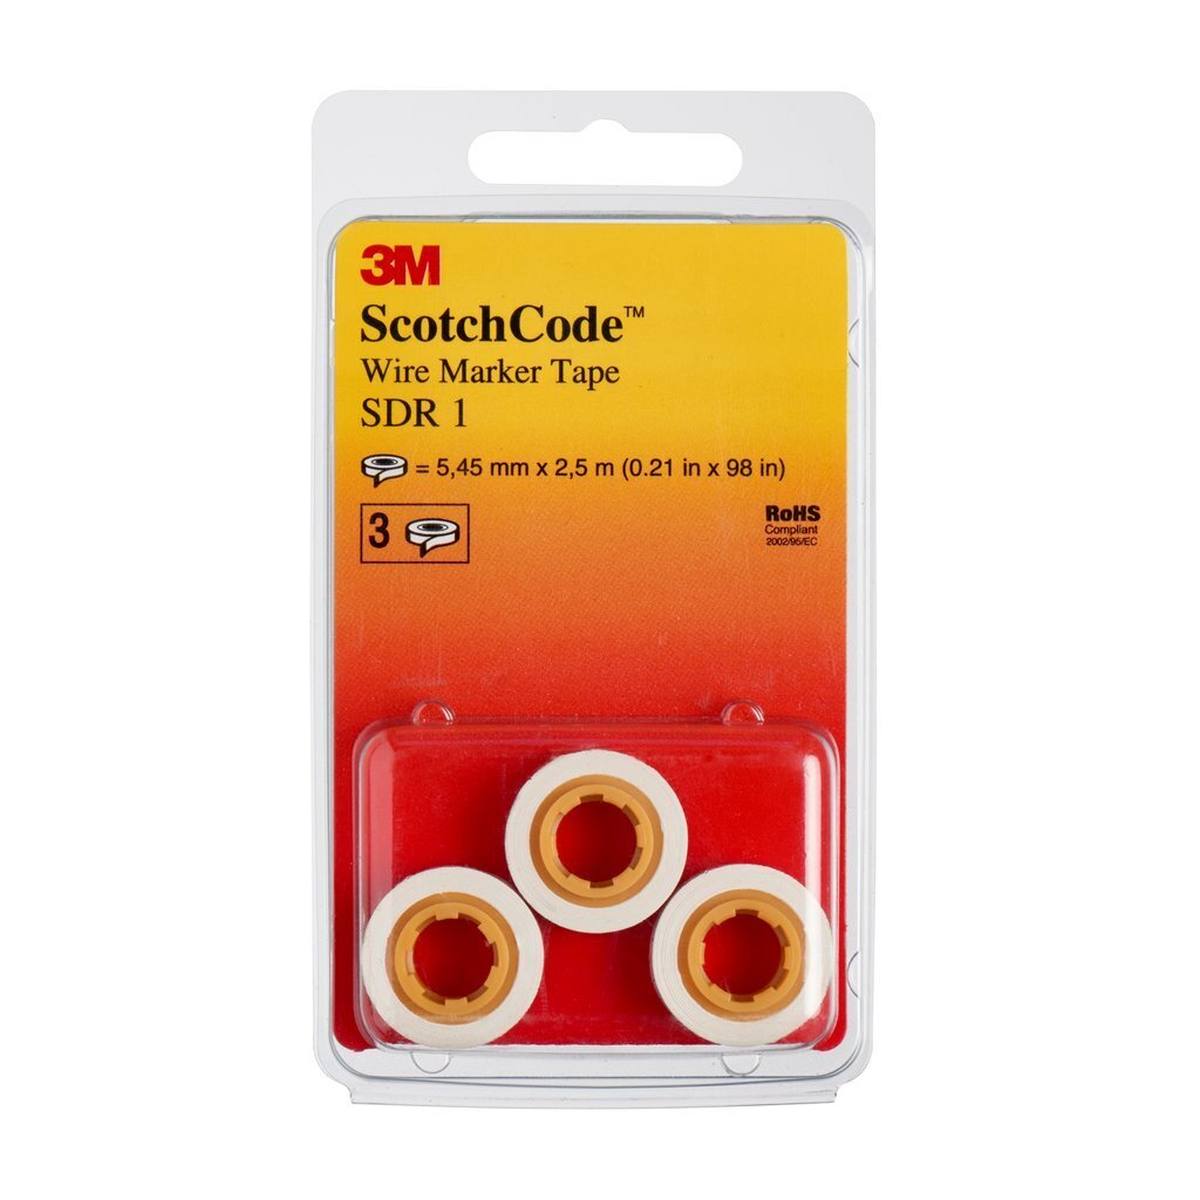 3M ScotchCode SDR-1 cable marker refill rolls, number 1, pack of 3